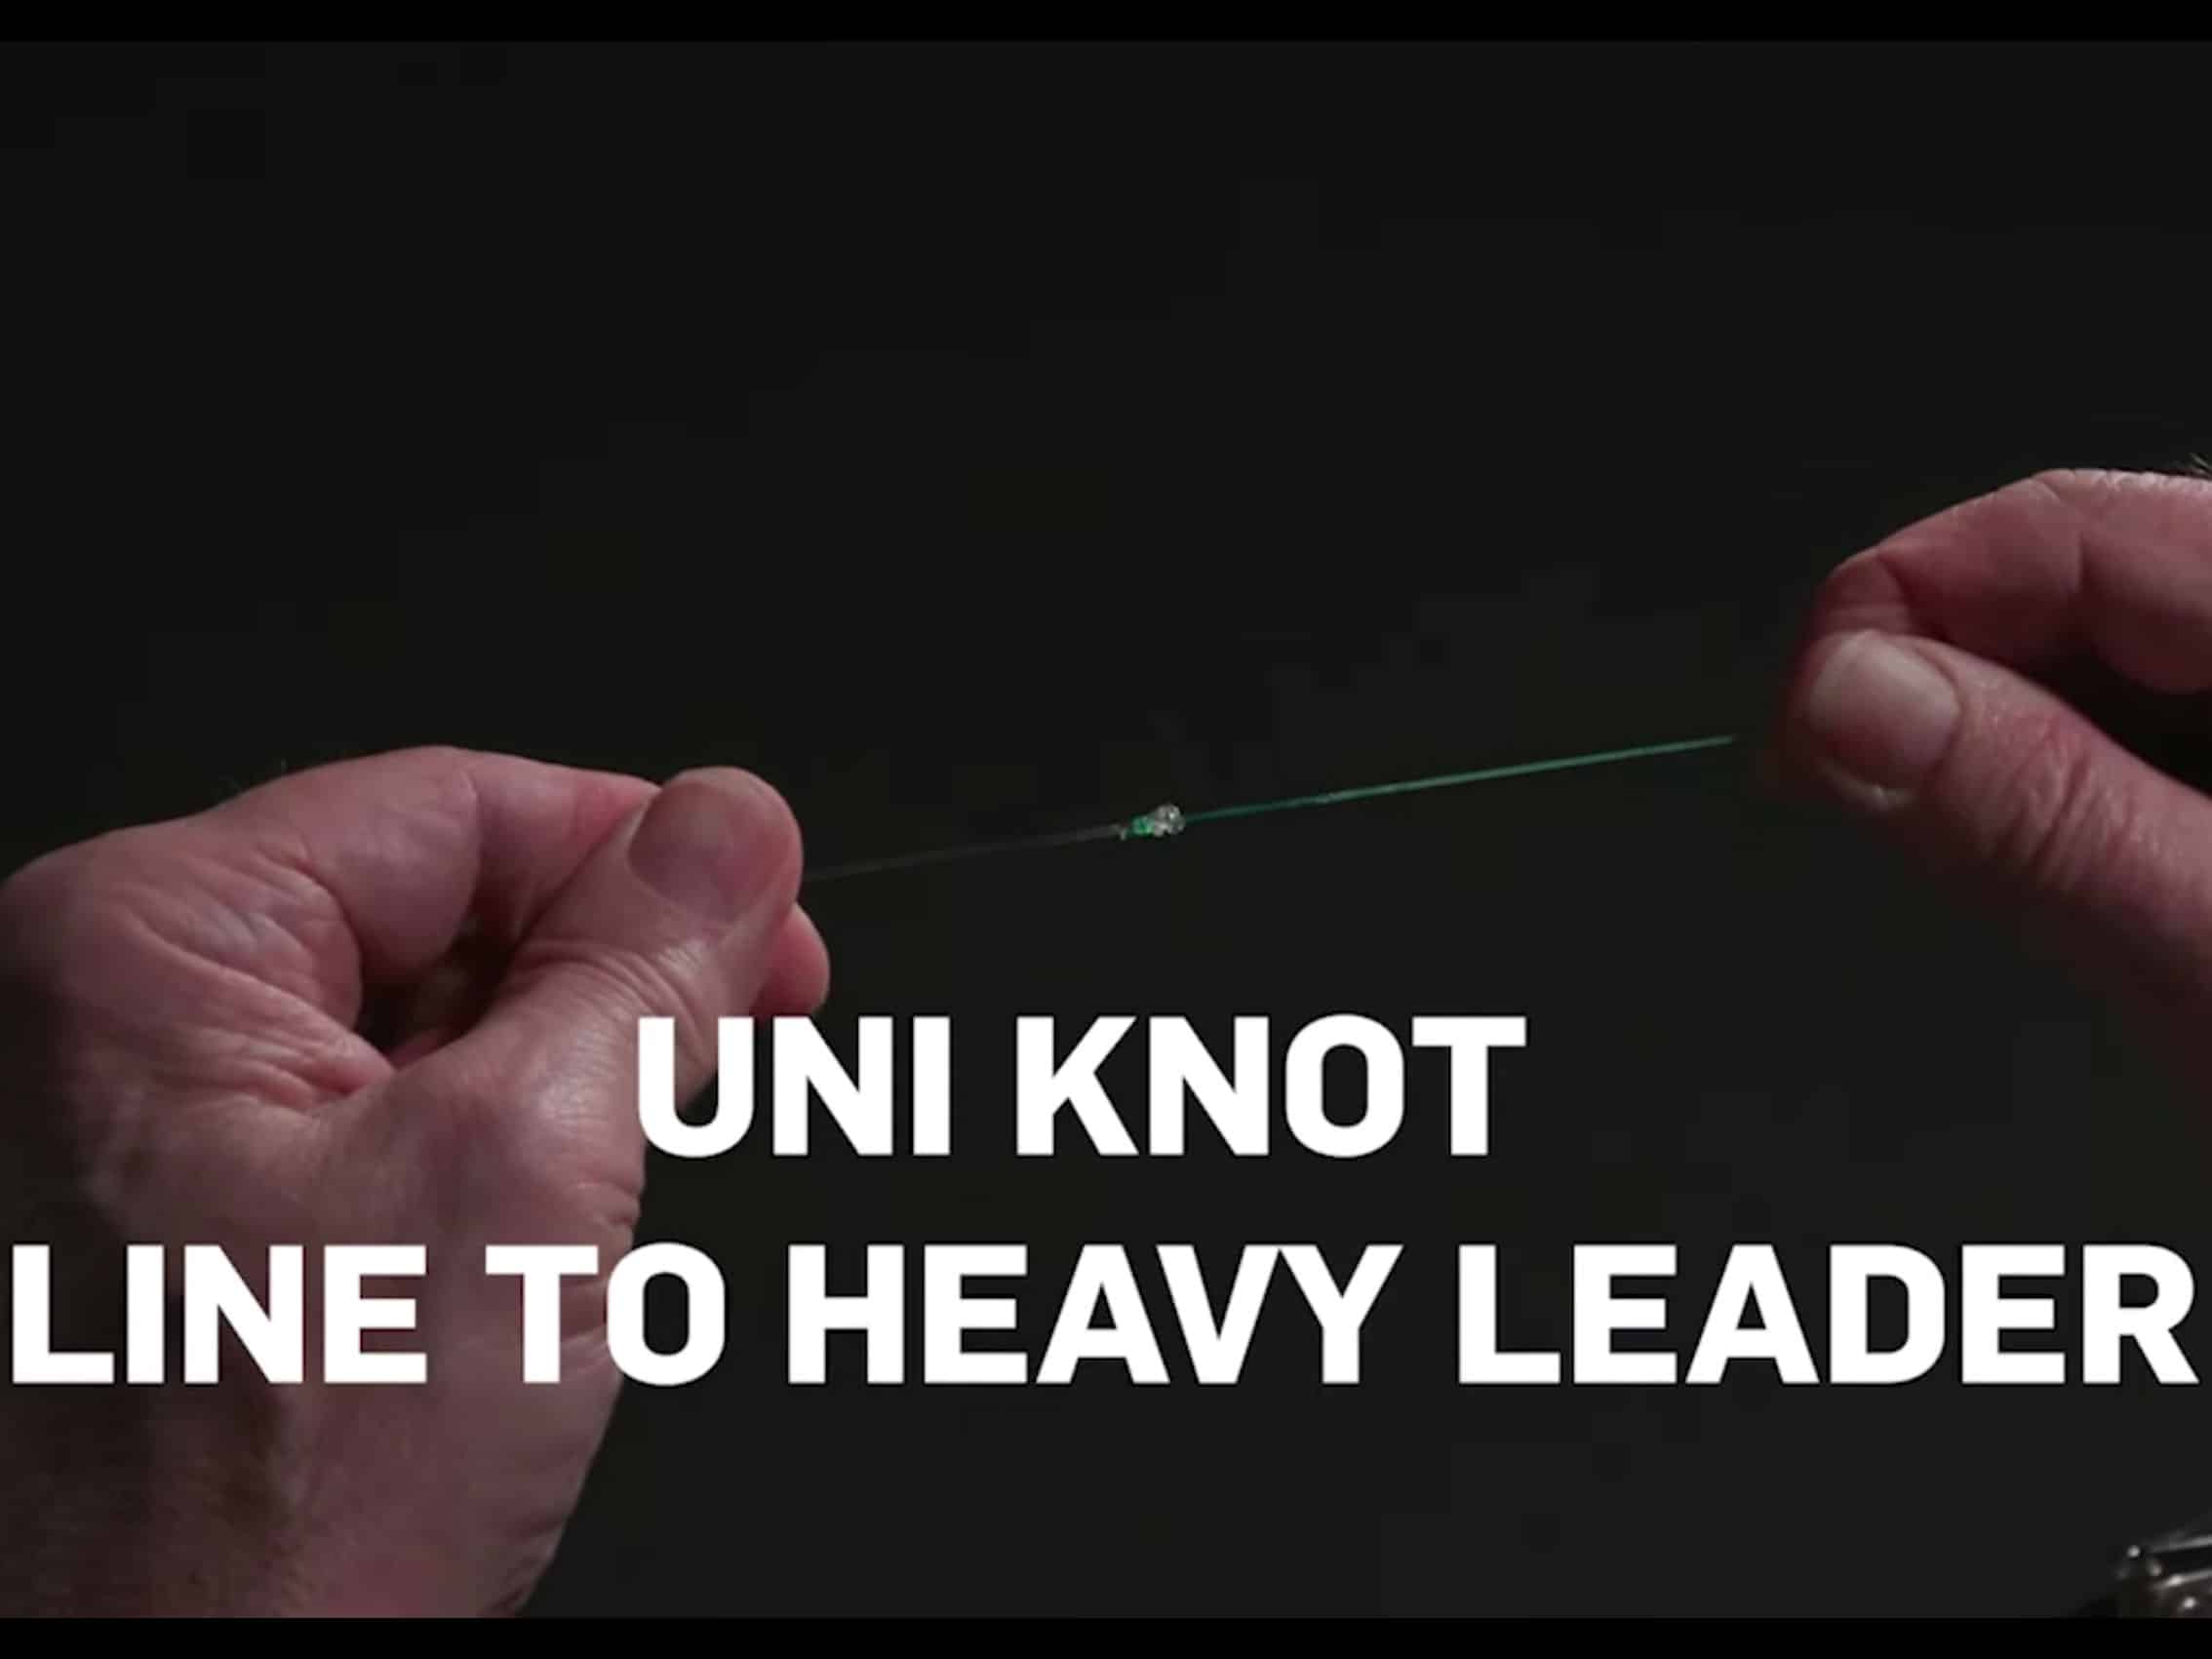 How to Tie a Uni-Knot Joining Line to Heavy Leader